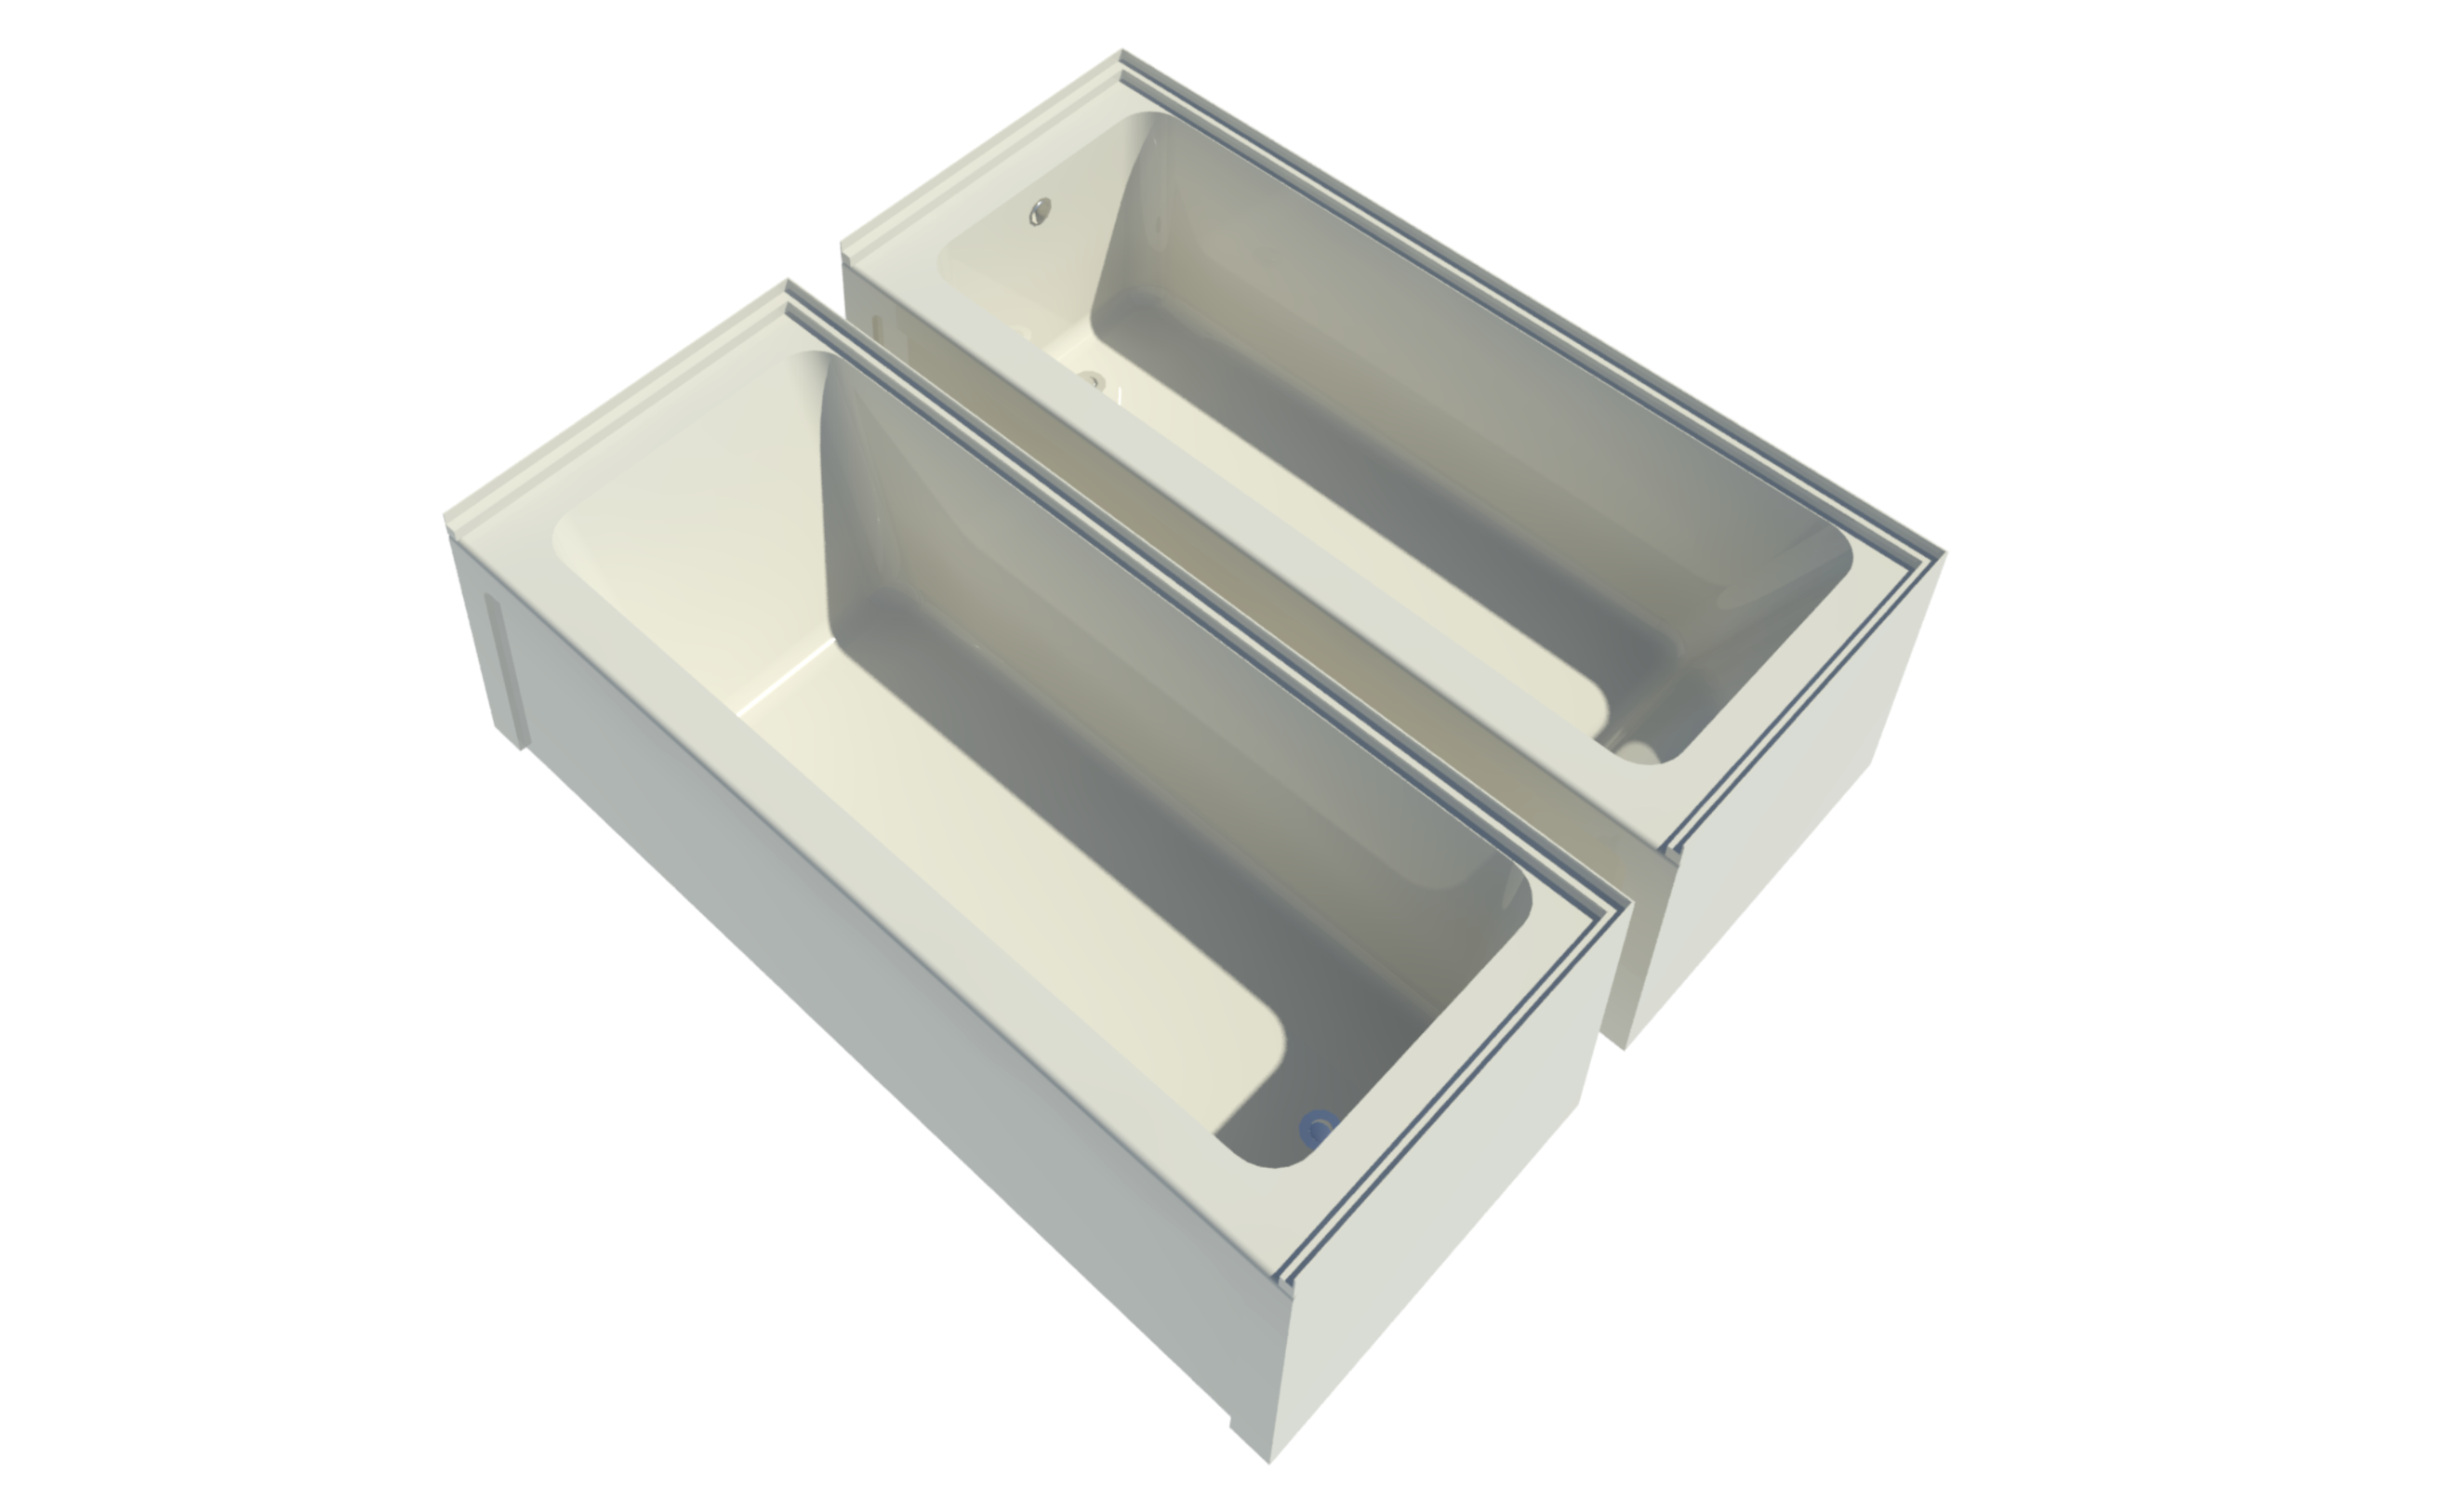 Revit raytrace showing Langley alcove bathtub variations in the almond finish and left and right-handed drain orientations.